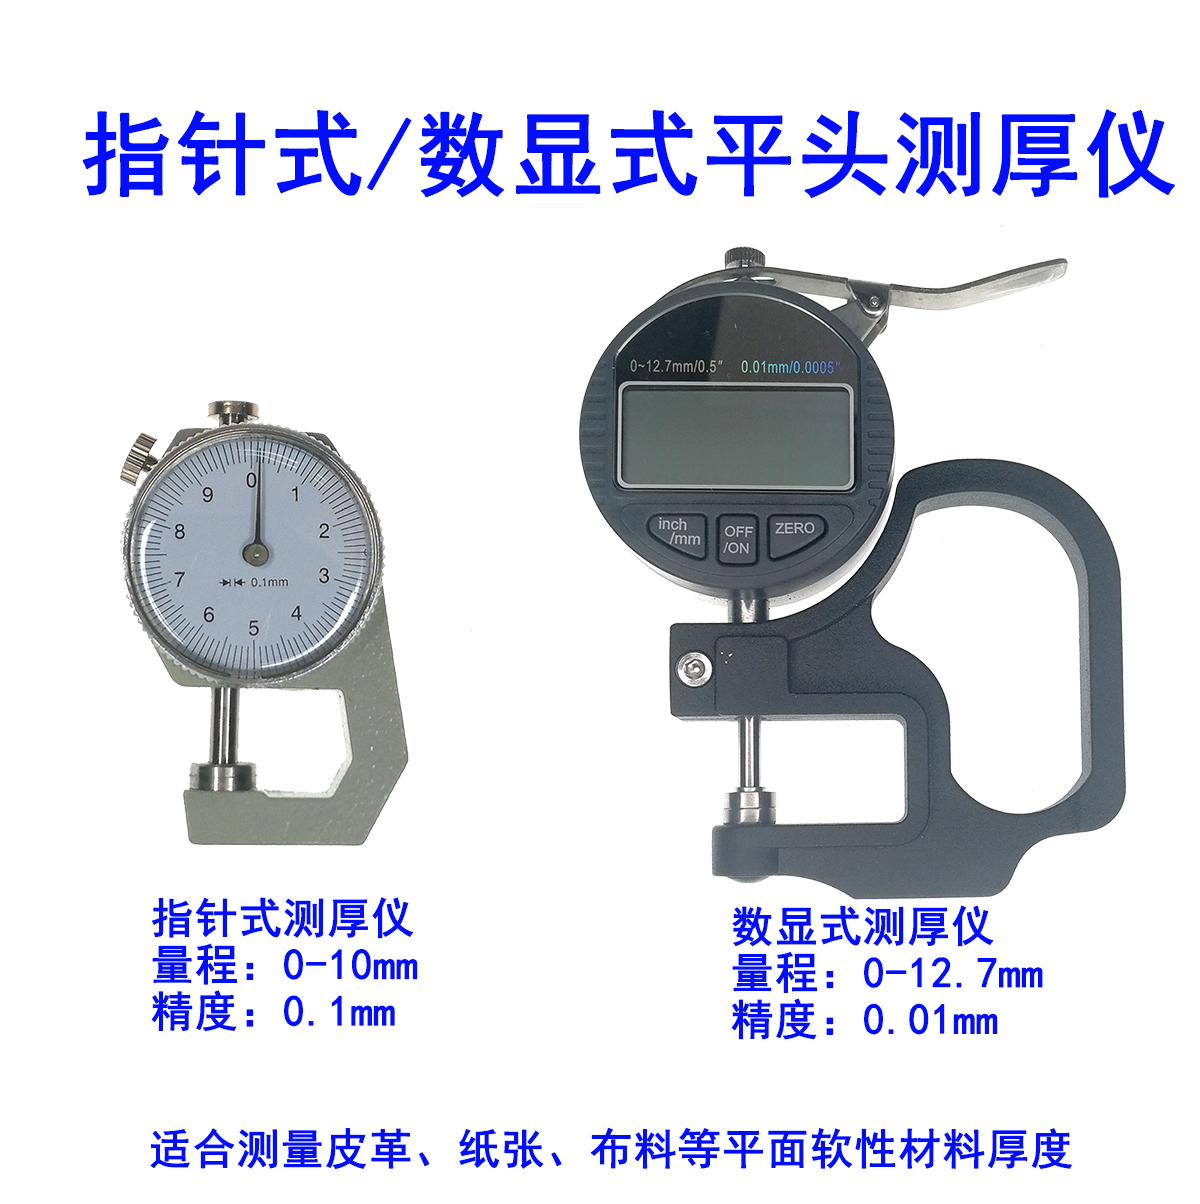 Finger-type digital display gauge thickness gauge thickness gauge measuring leather sheet paper thickness high-precision caliper